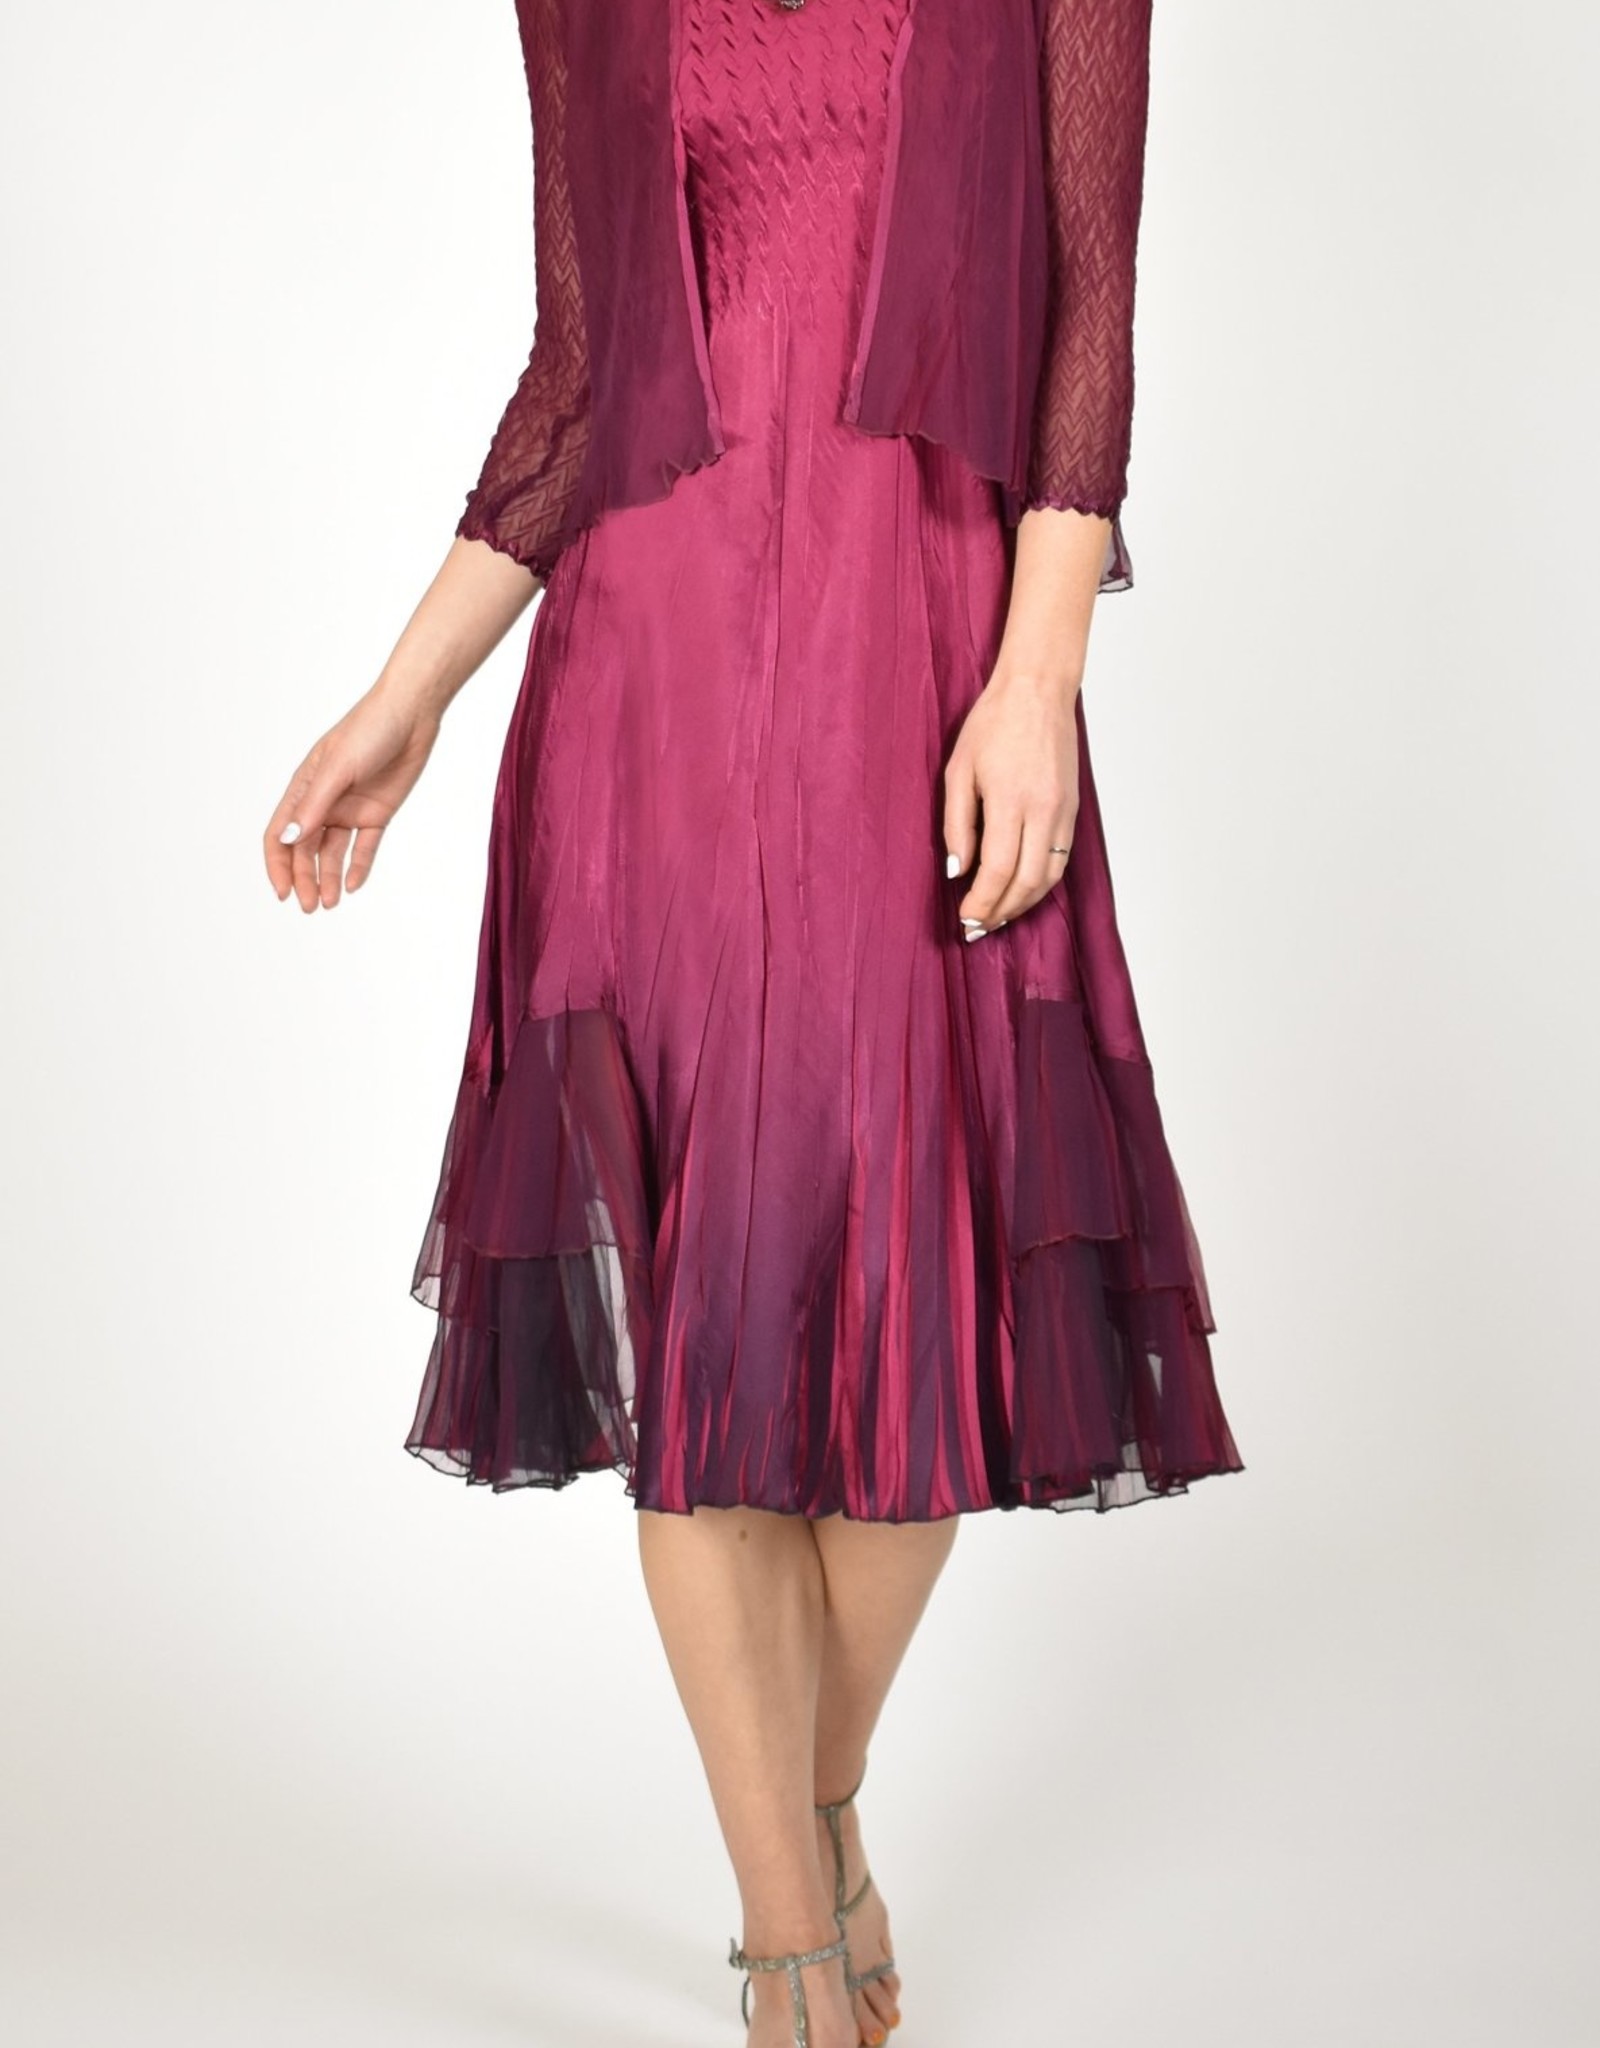 Komarov Red Plum Ombre Dress with Jacket